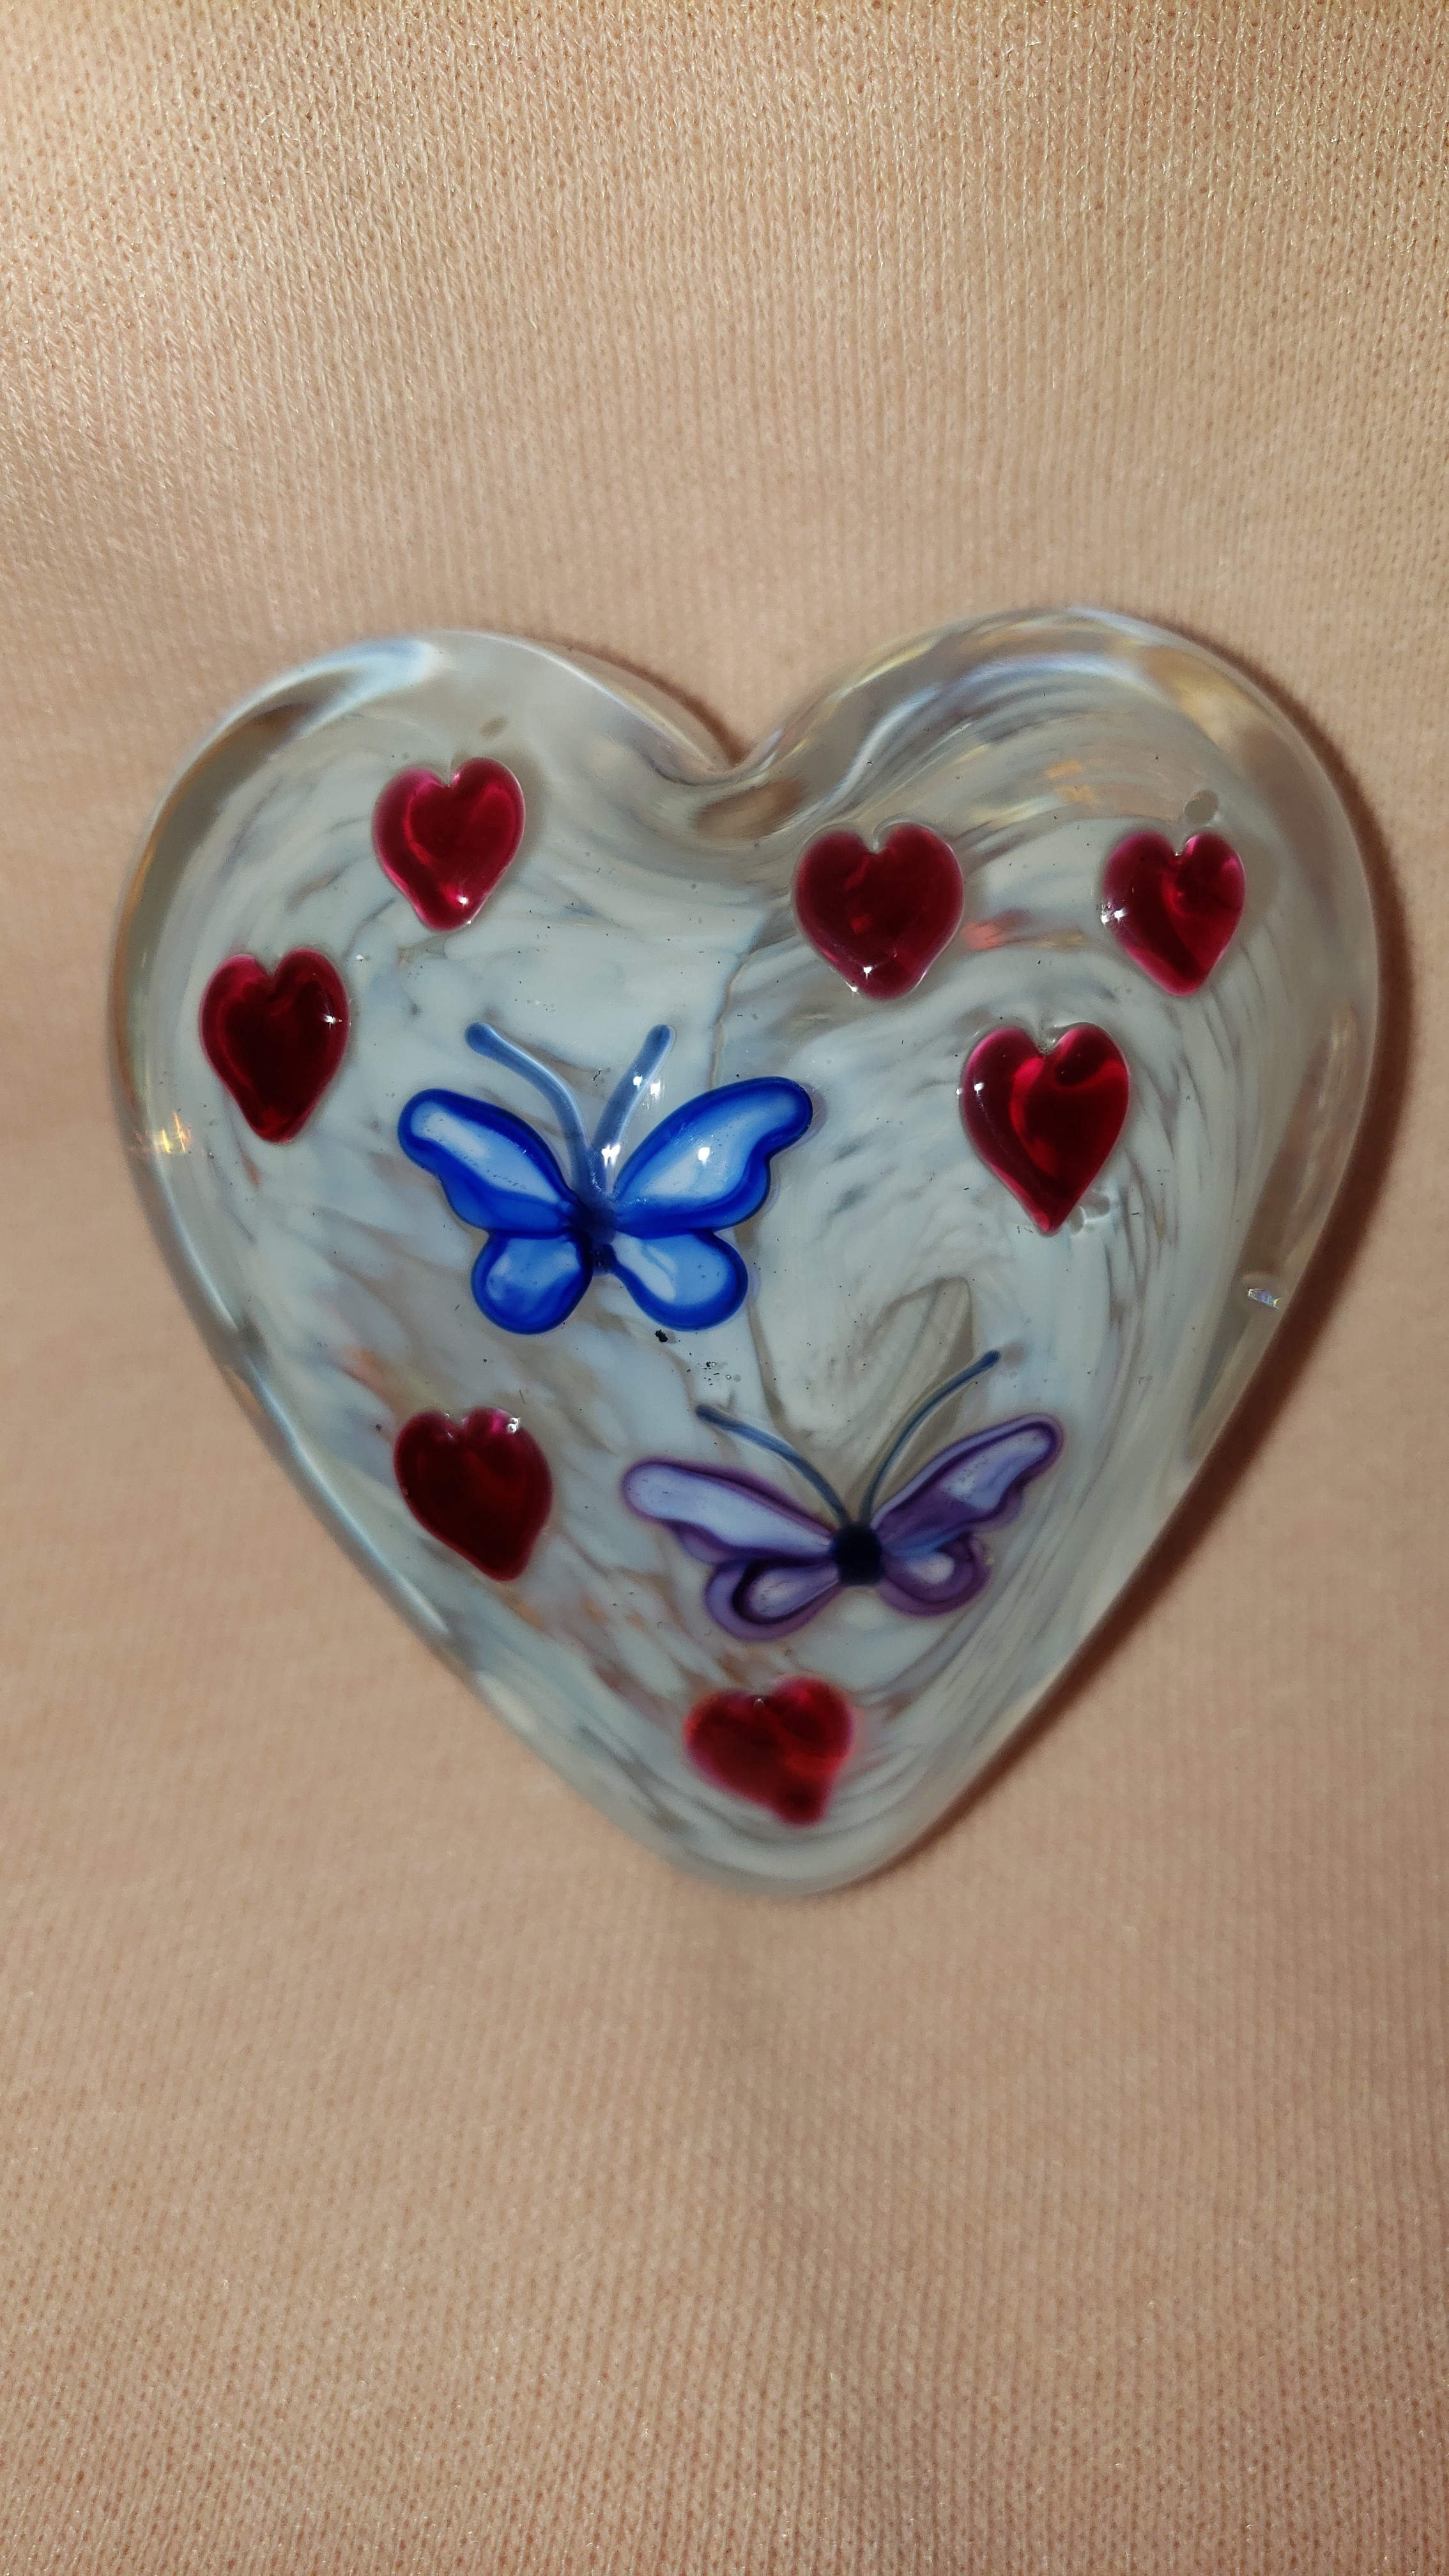 White Glass Heart Paperweight With Hearts and Butterflies- by David Salazar As Seen In...